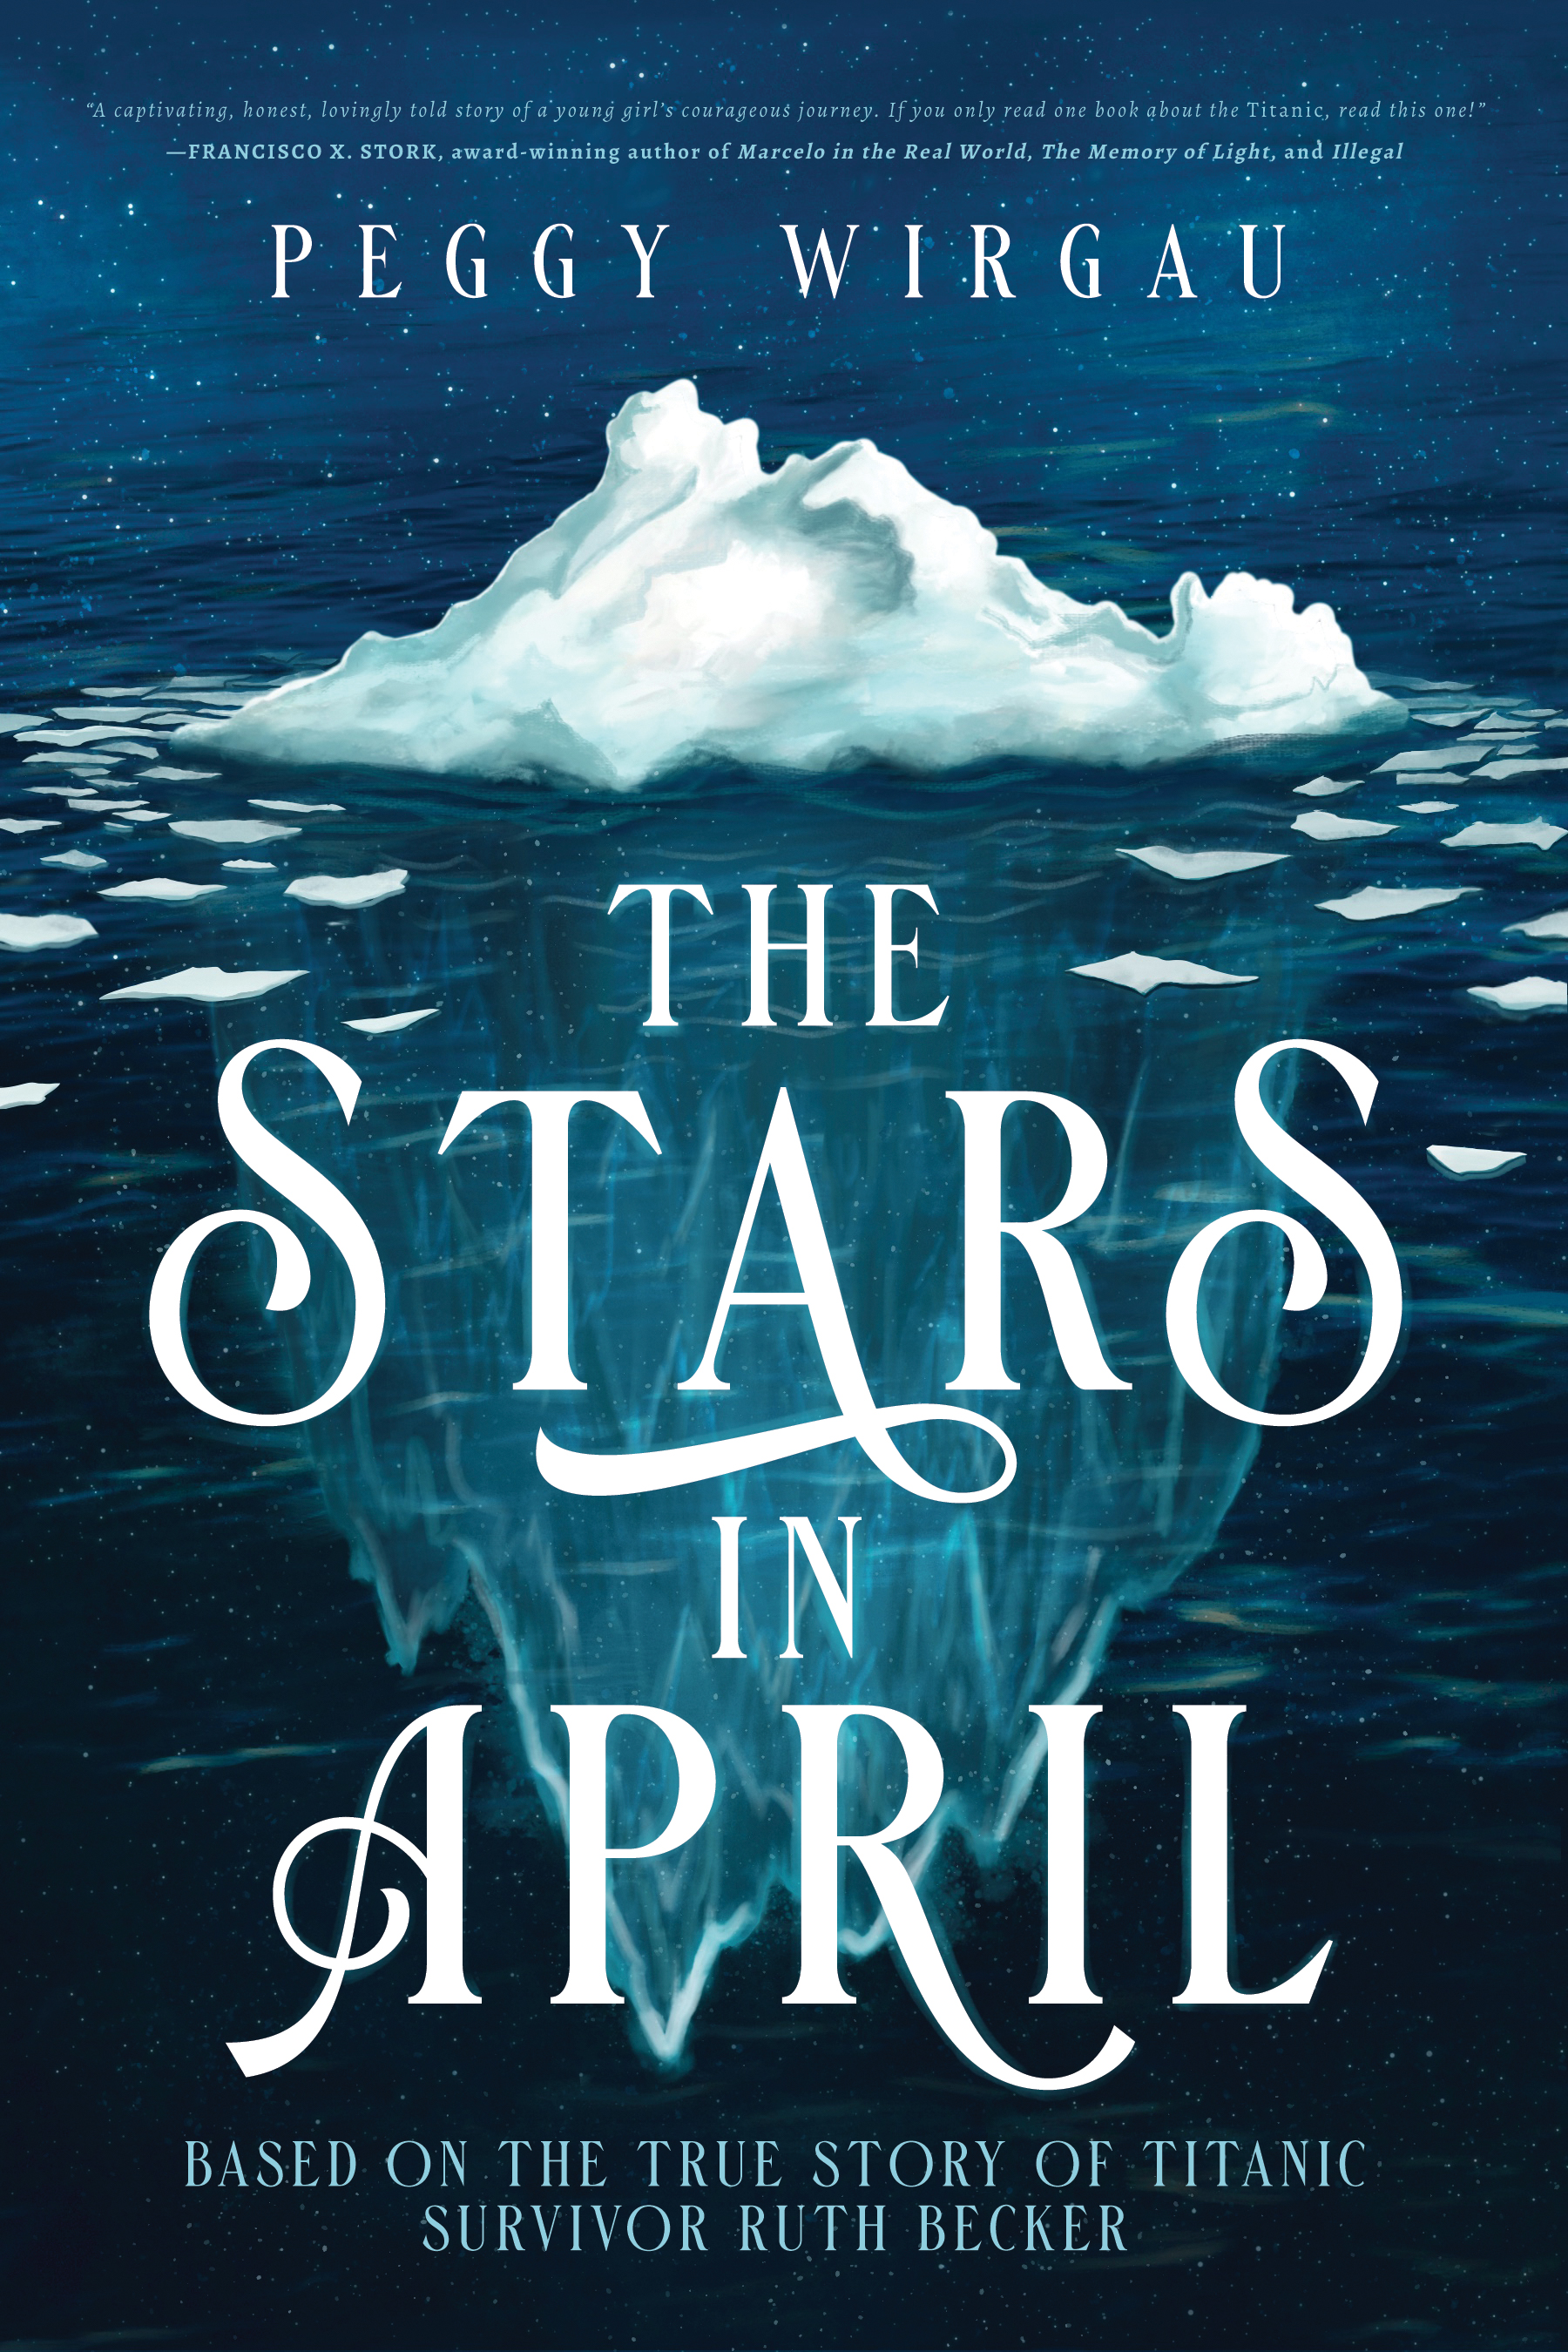 Coinciding with National Titanic Week 2021, Debut Novel 